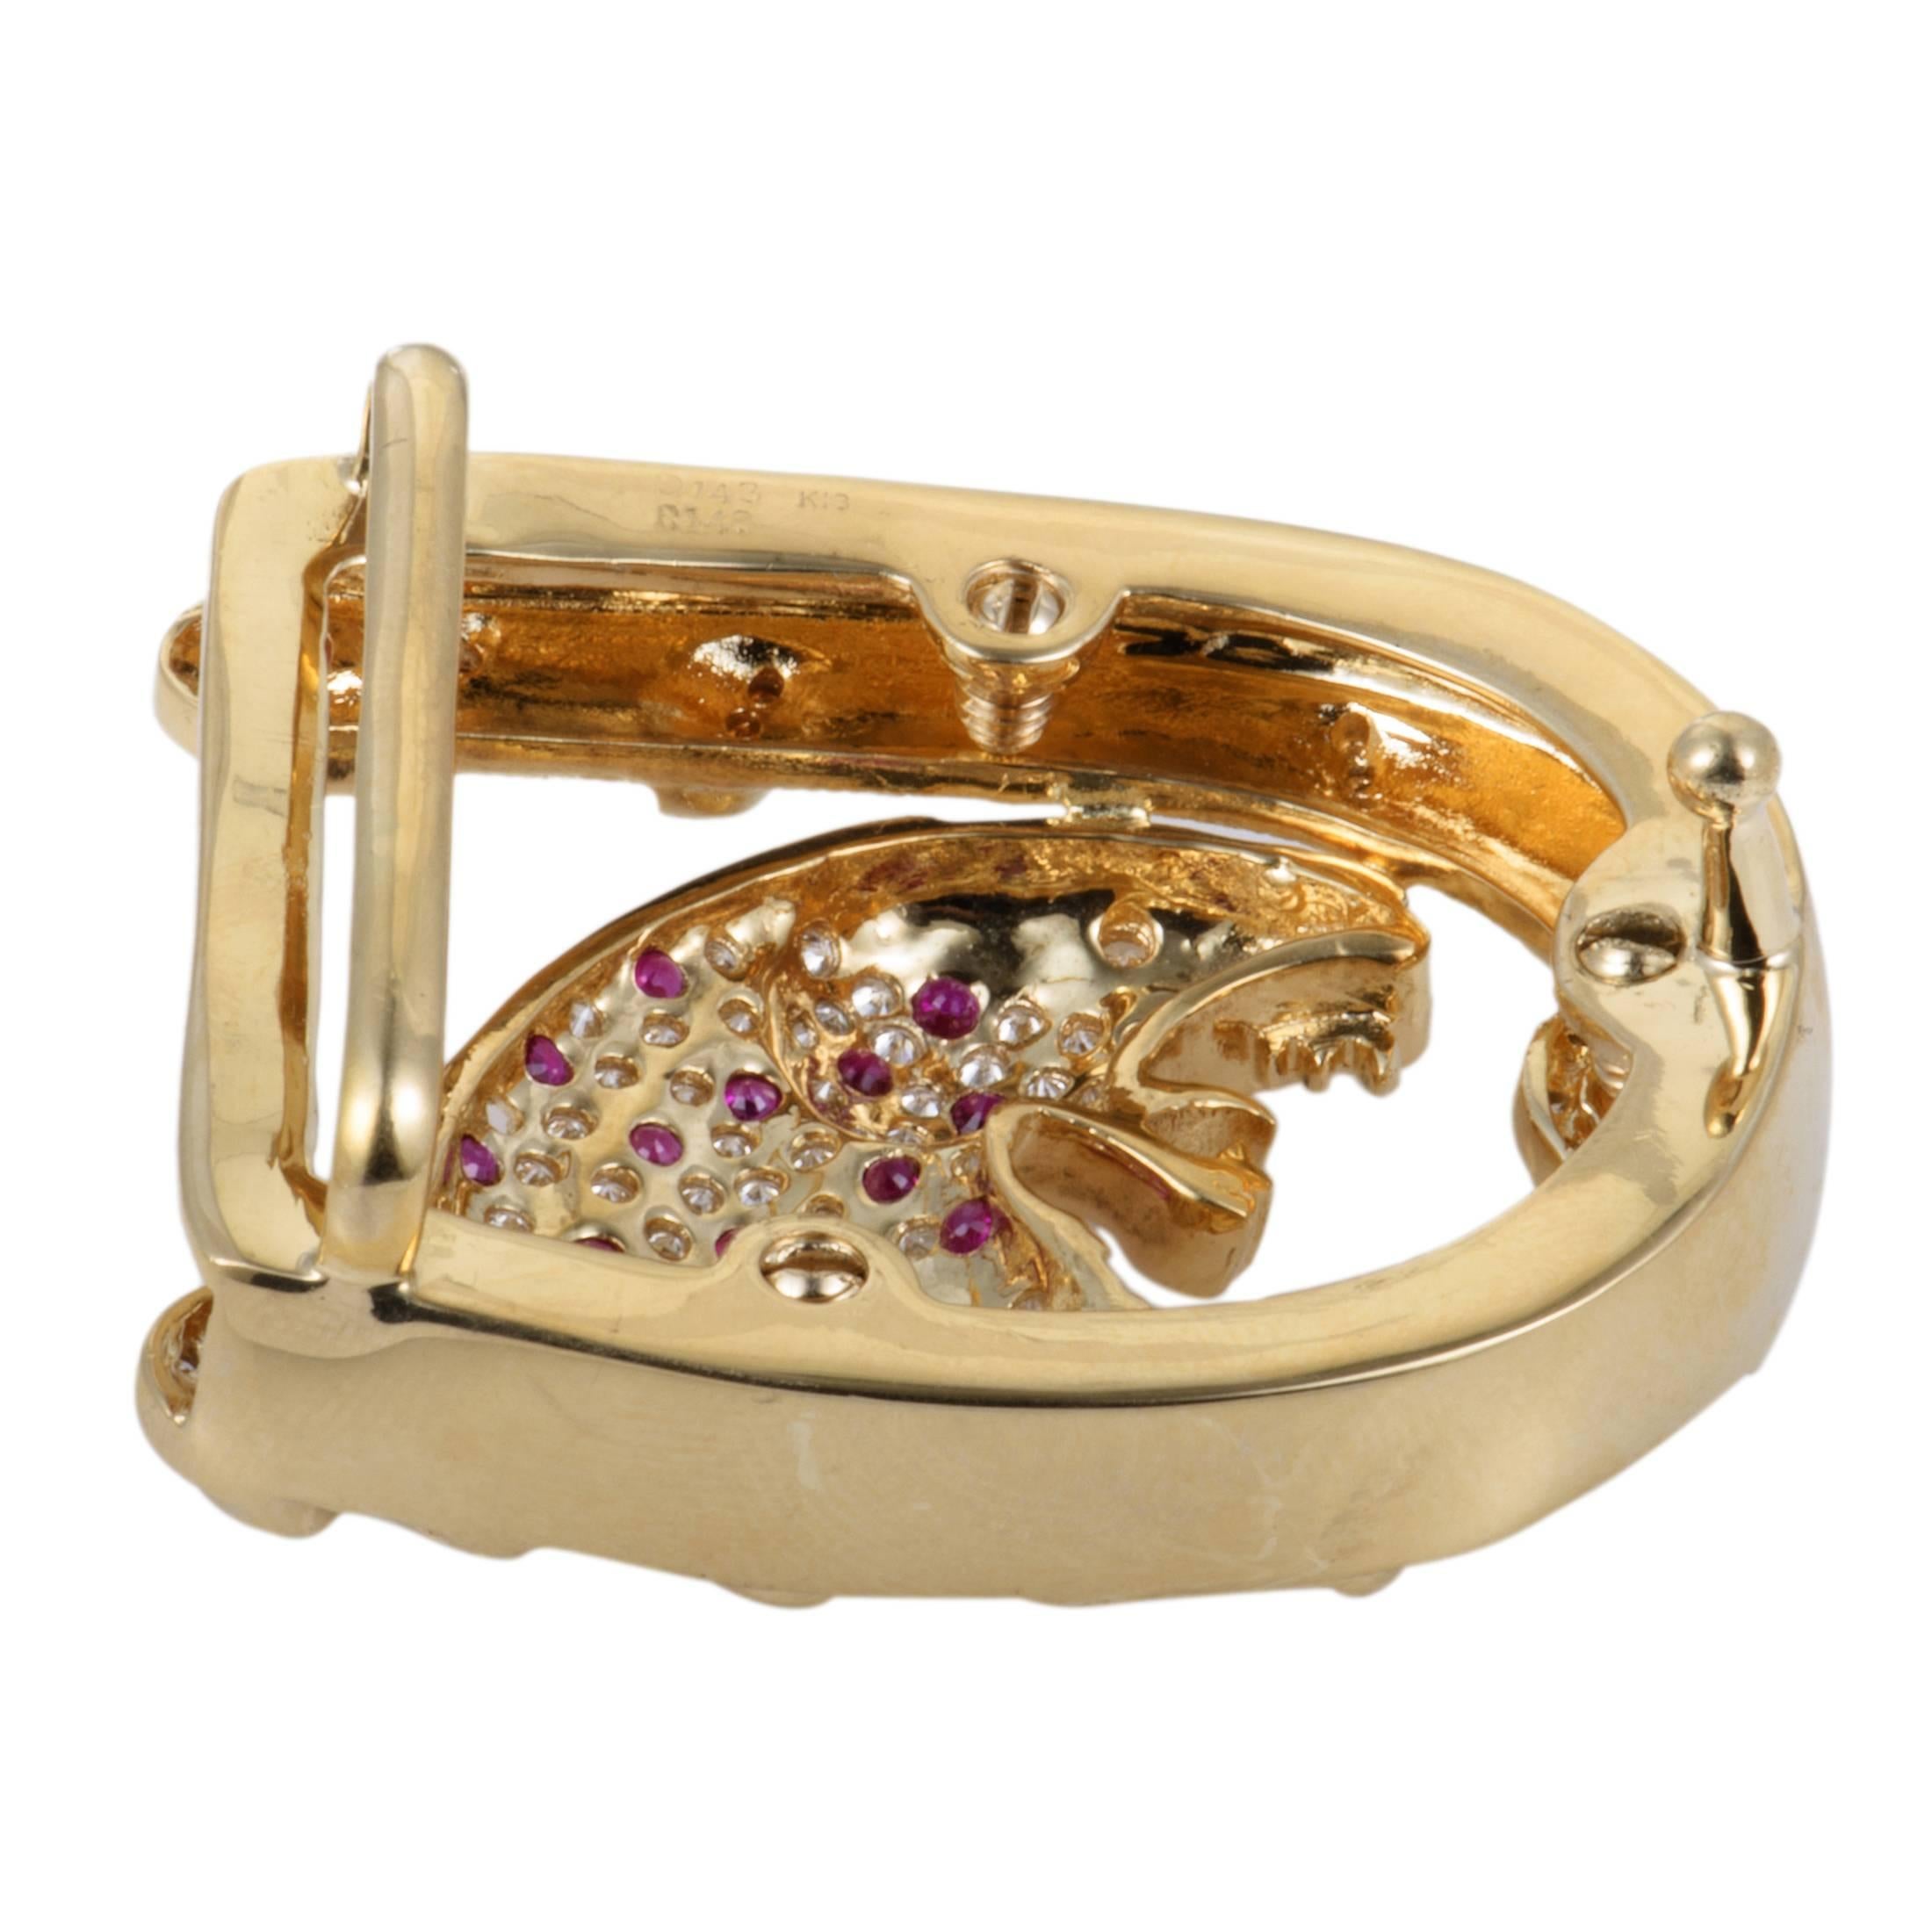 Men's Diamond and Ruby Yellow Gold Belt Buckle